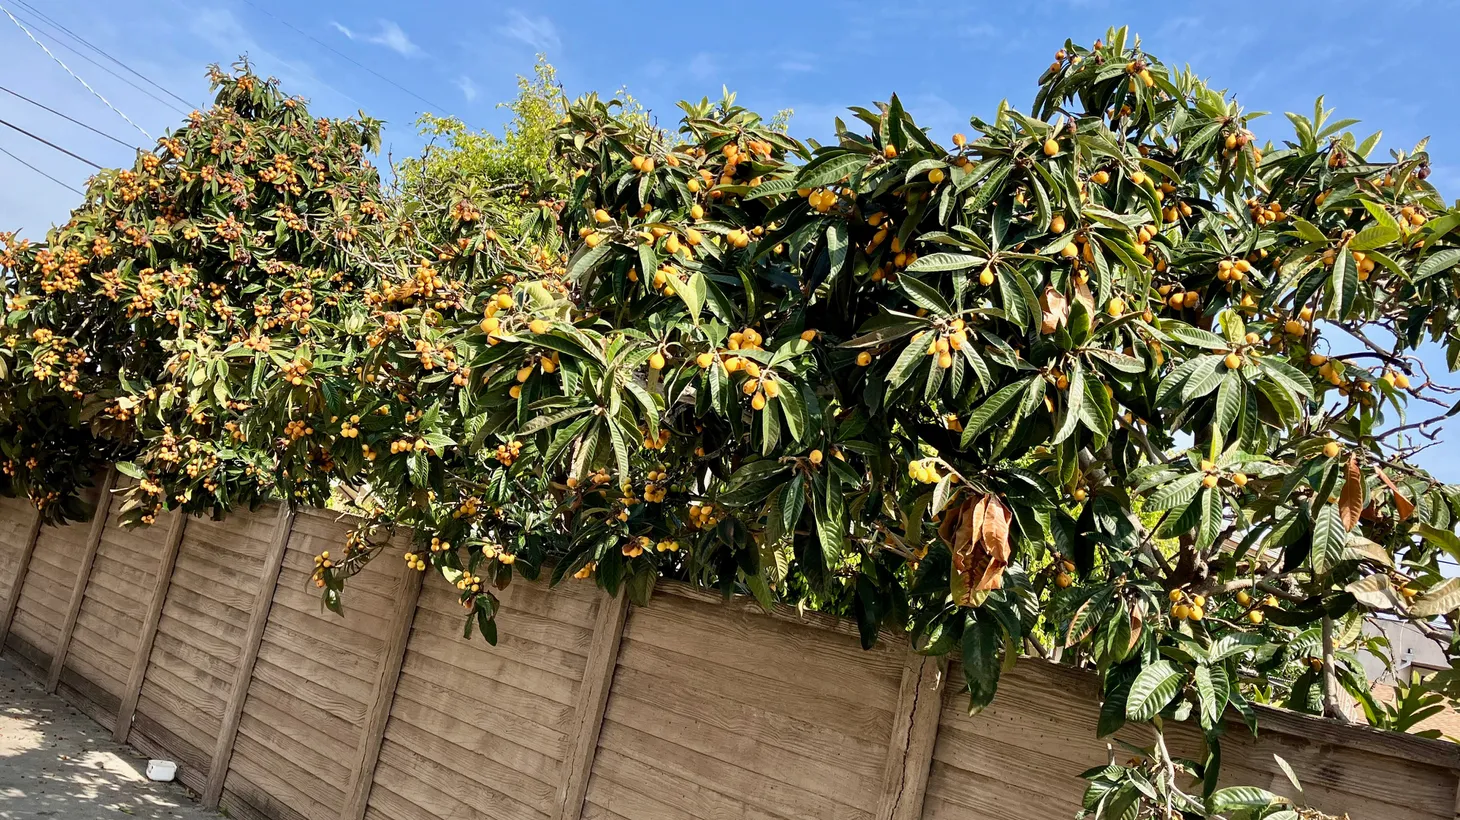 Several loquat trees in East Hollywood create a hedge of fruit and an opportunity for passersby to pick.